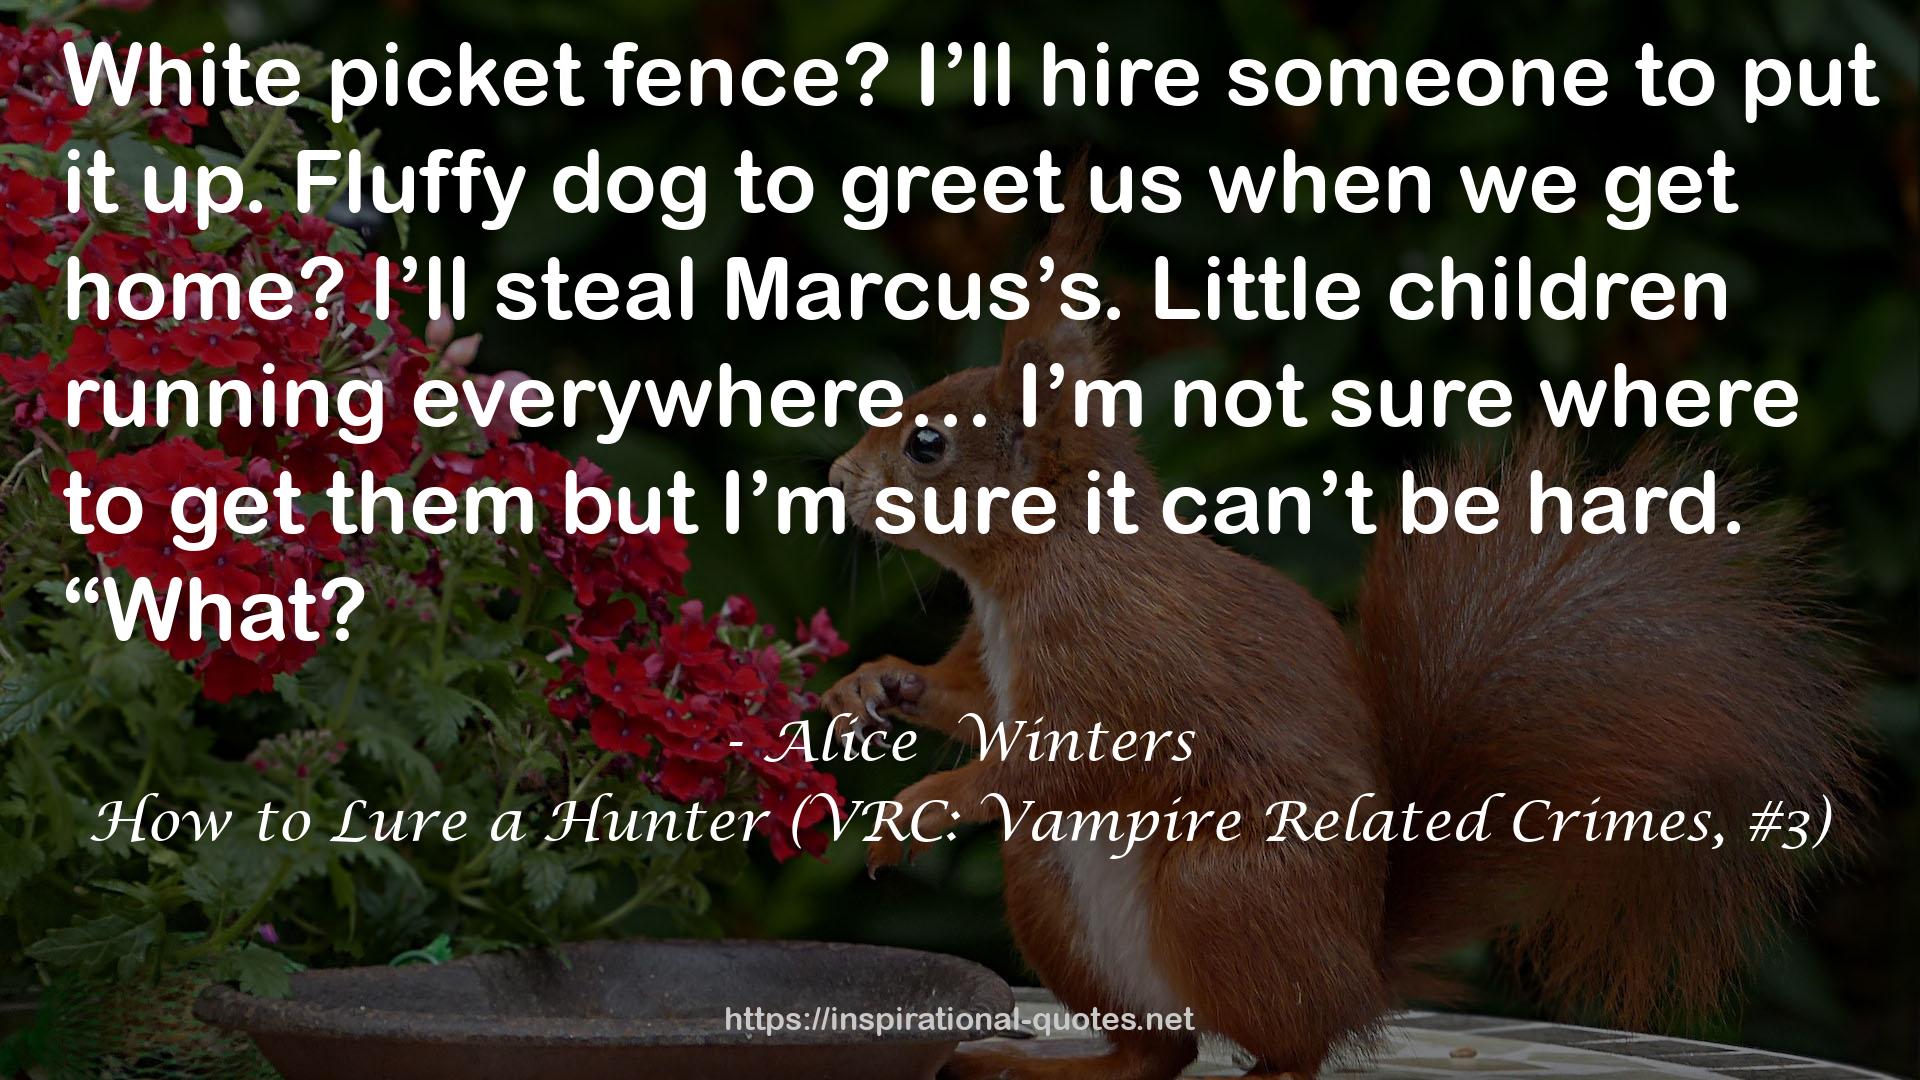 How to Lure a Hunter (VRC: Vampire Related Crimes, #3) QUOTES